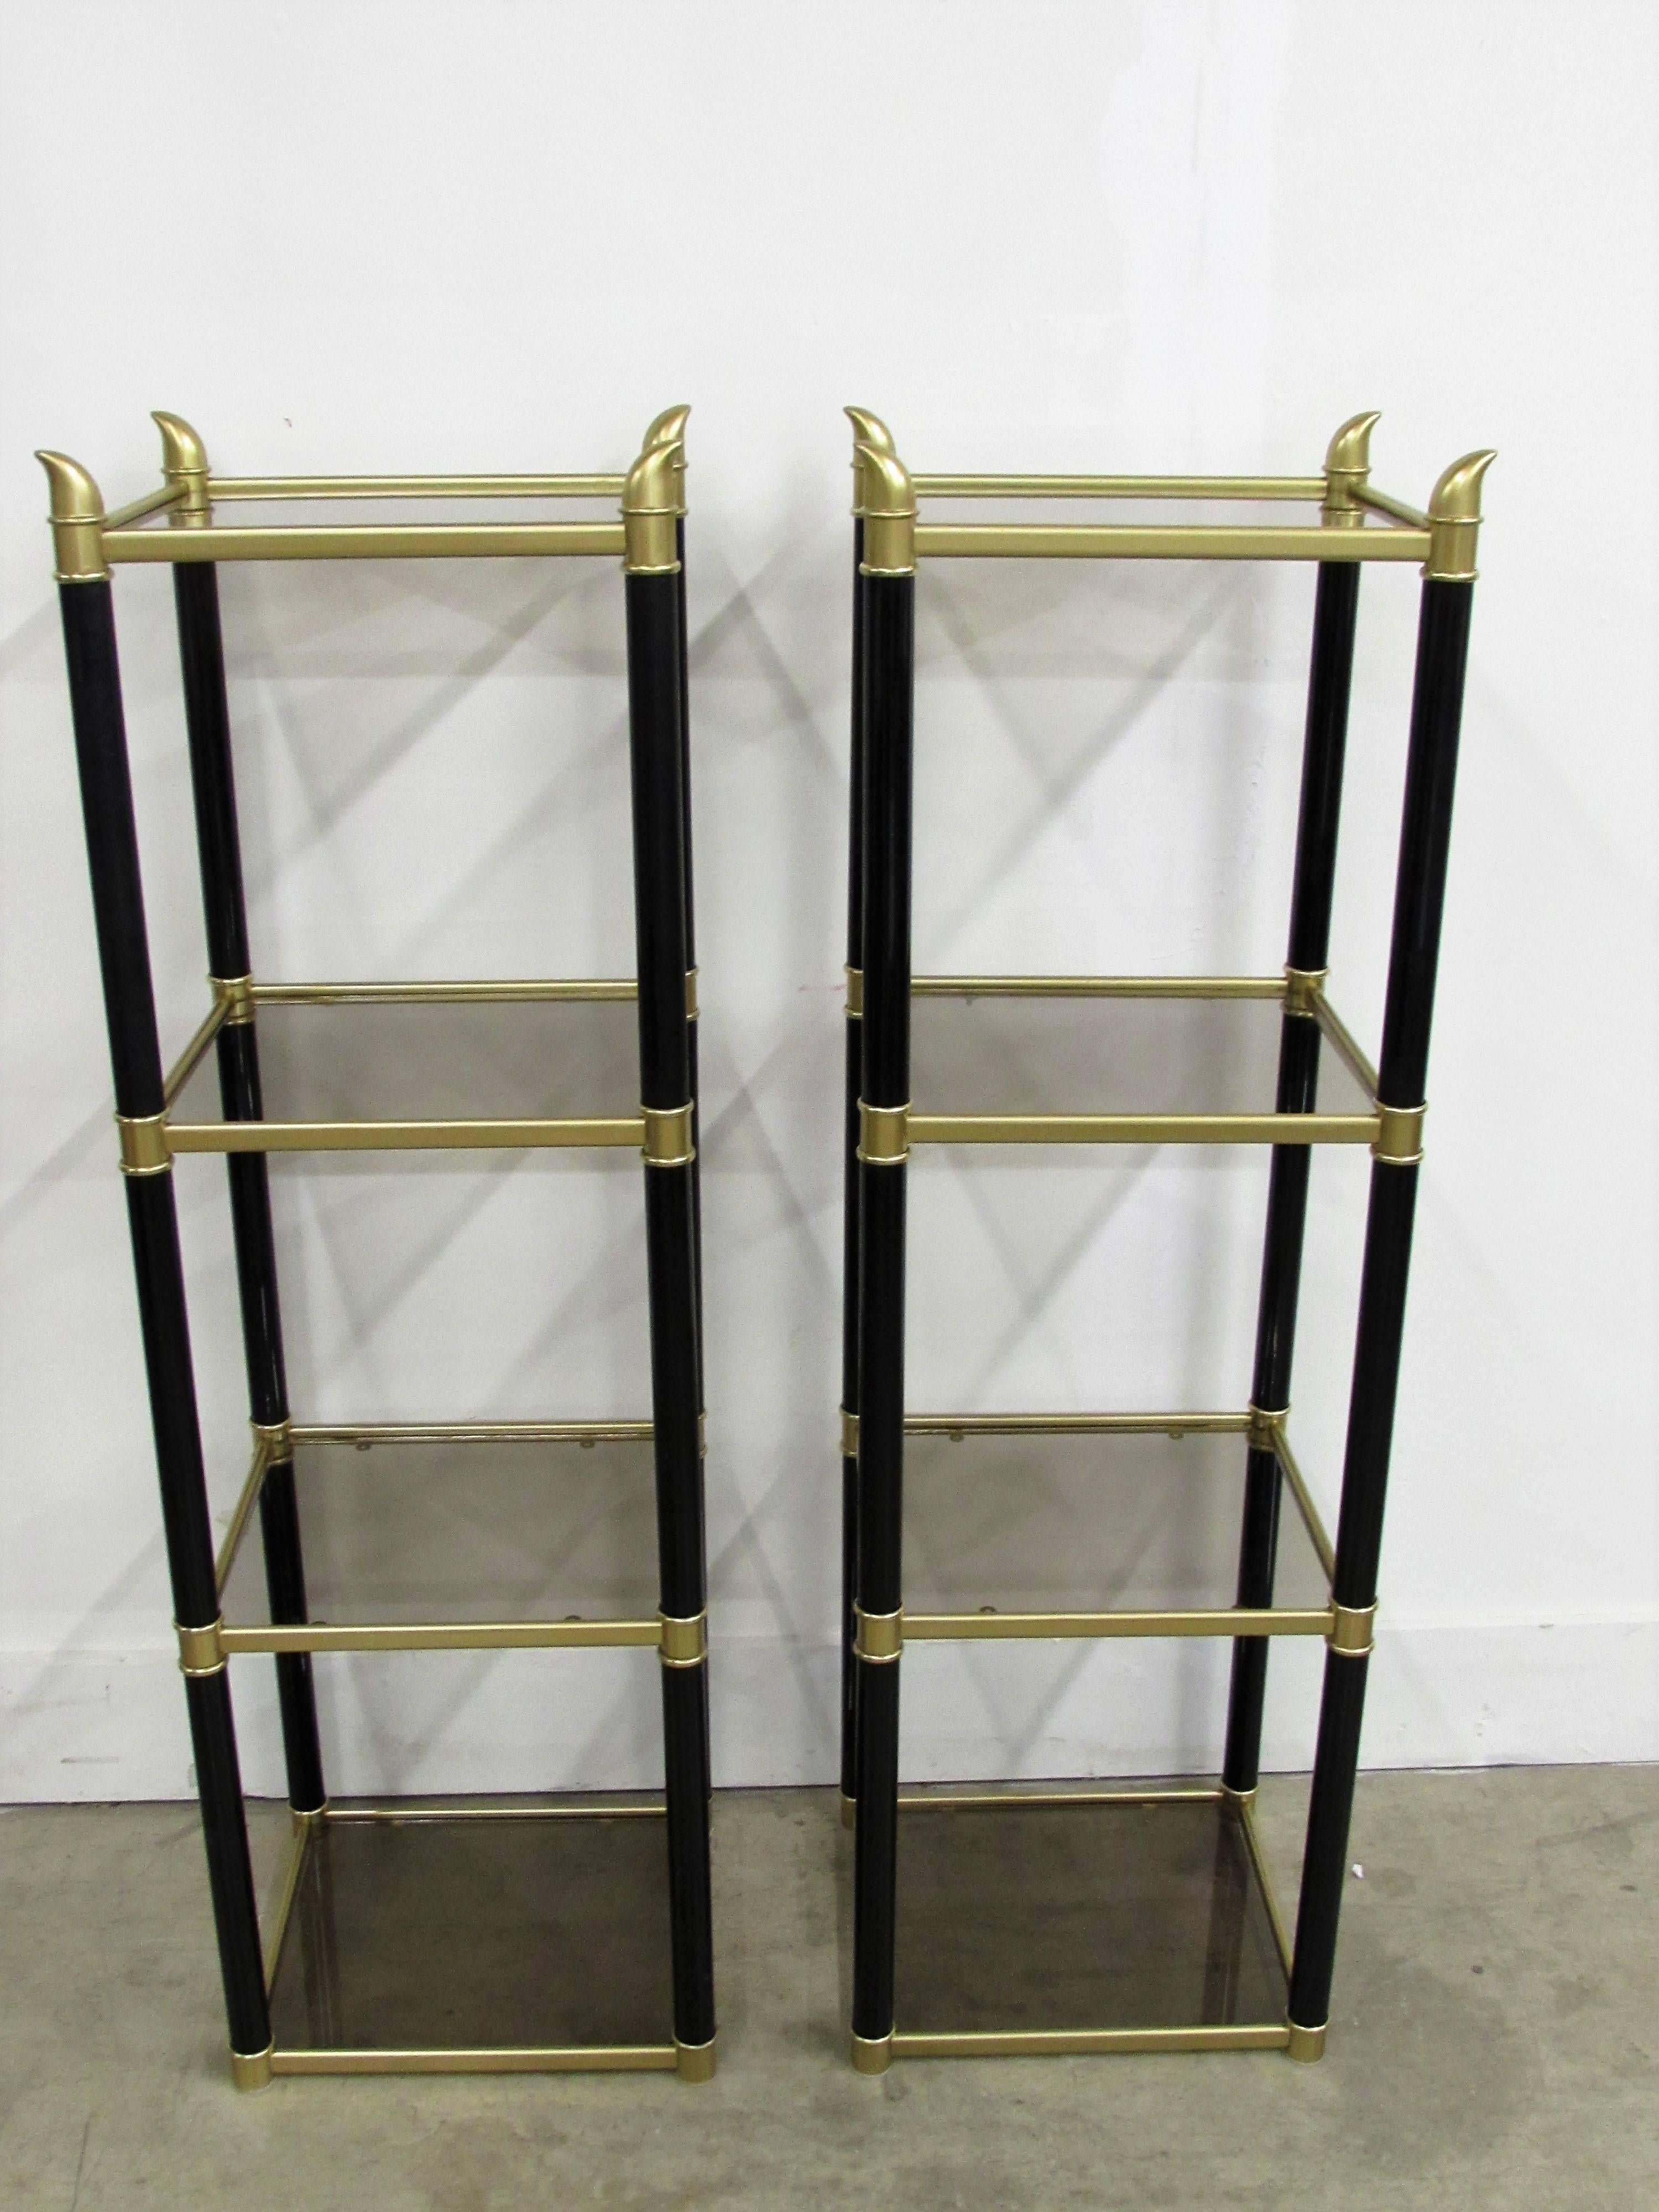 Pair of chinoiserie metal black and gold étagerés with smoked glass on four shelves topped with a faux buffalo horns on each corner.